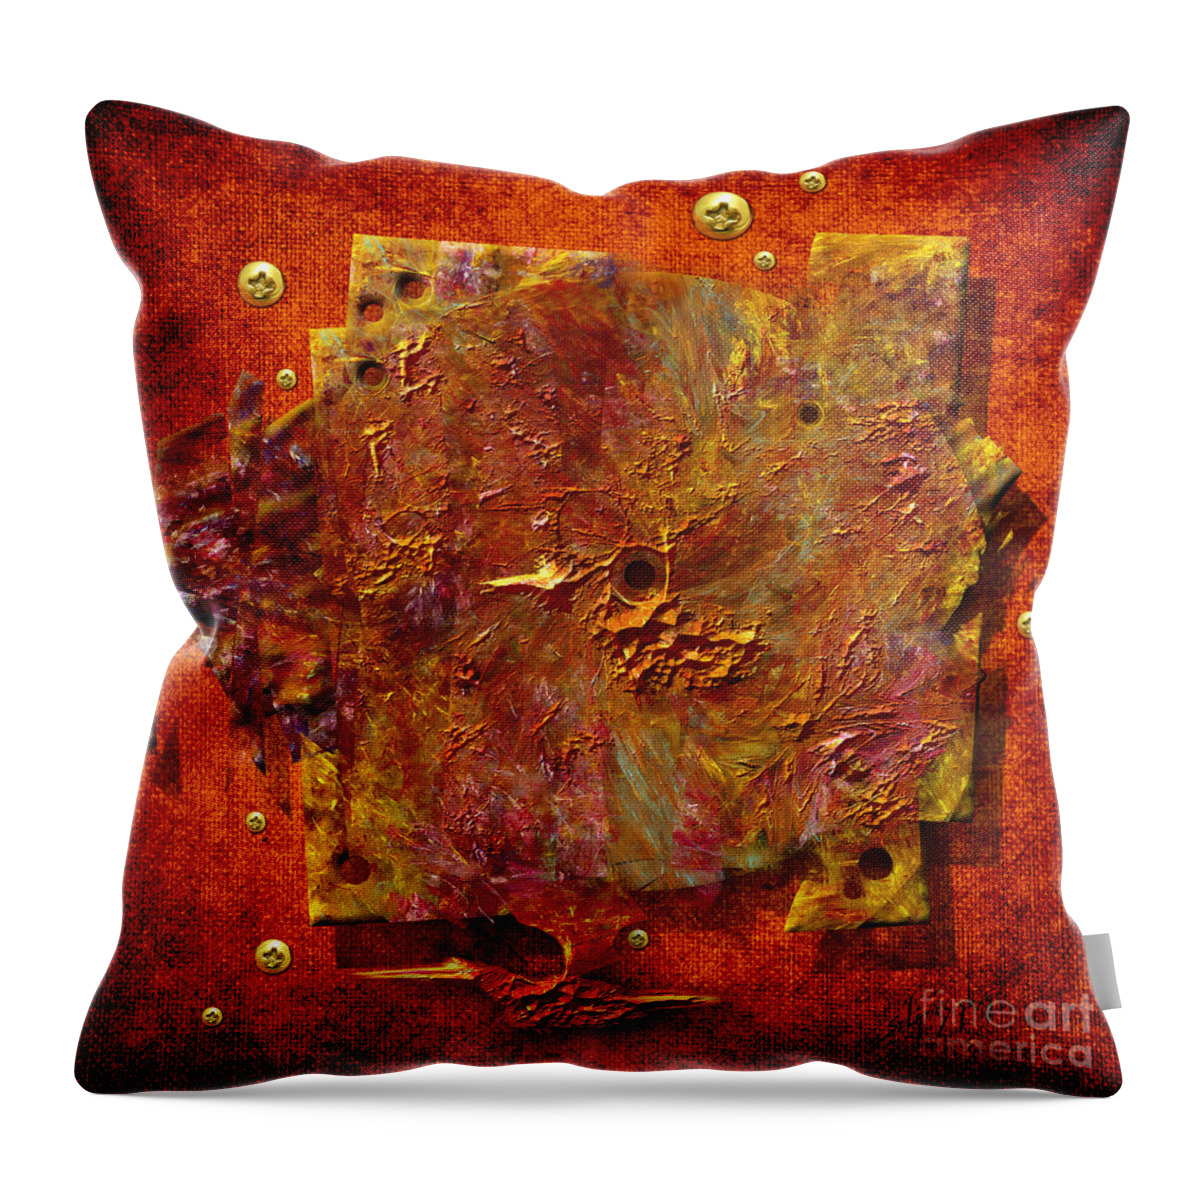 Abstract Throw Pillow featuring the painting Mortar disc by Alexa Szlavics